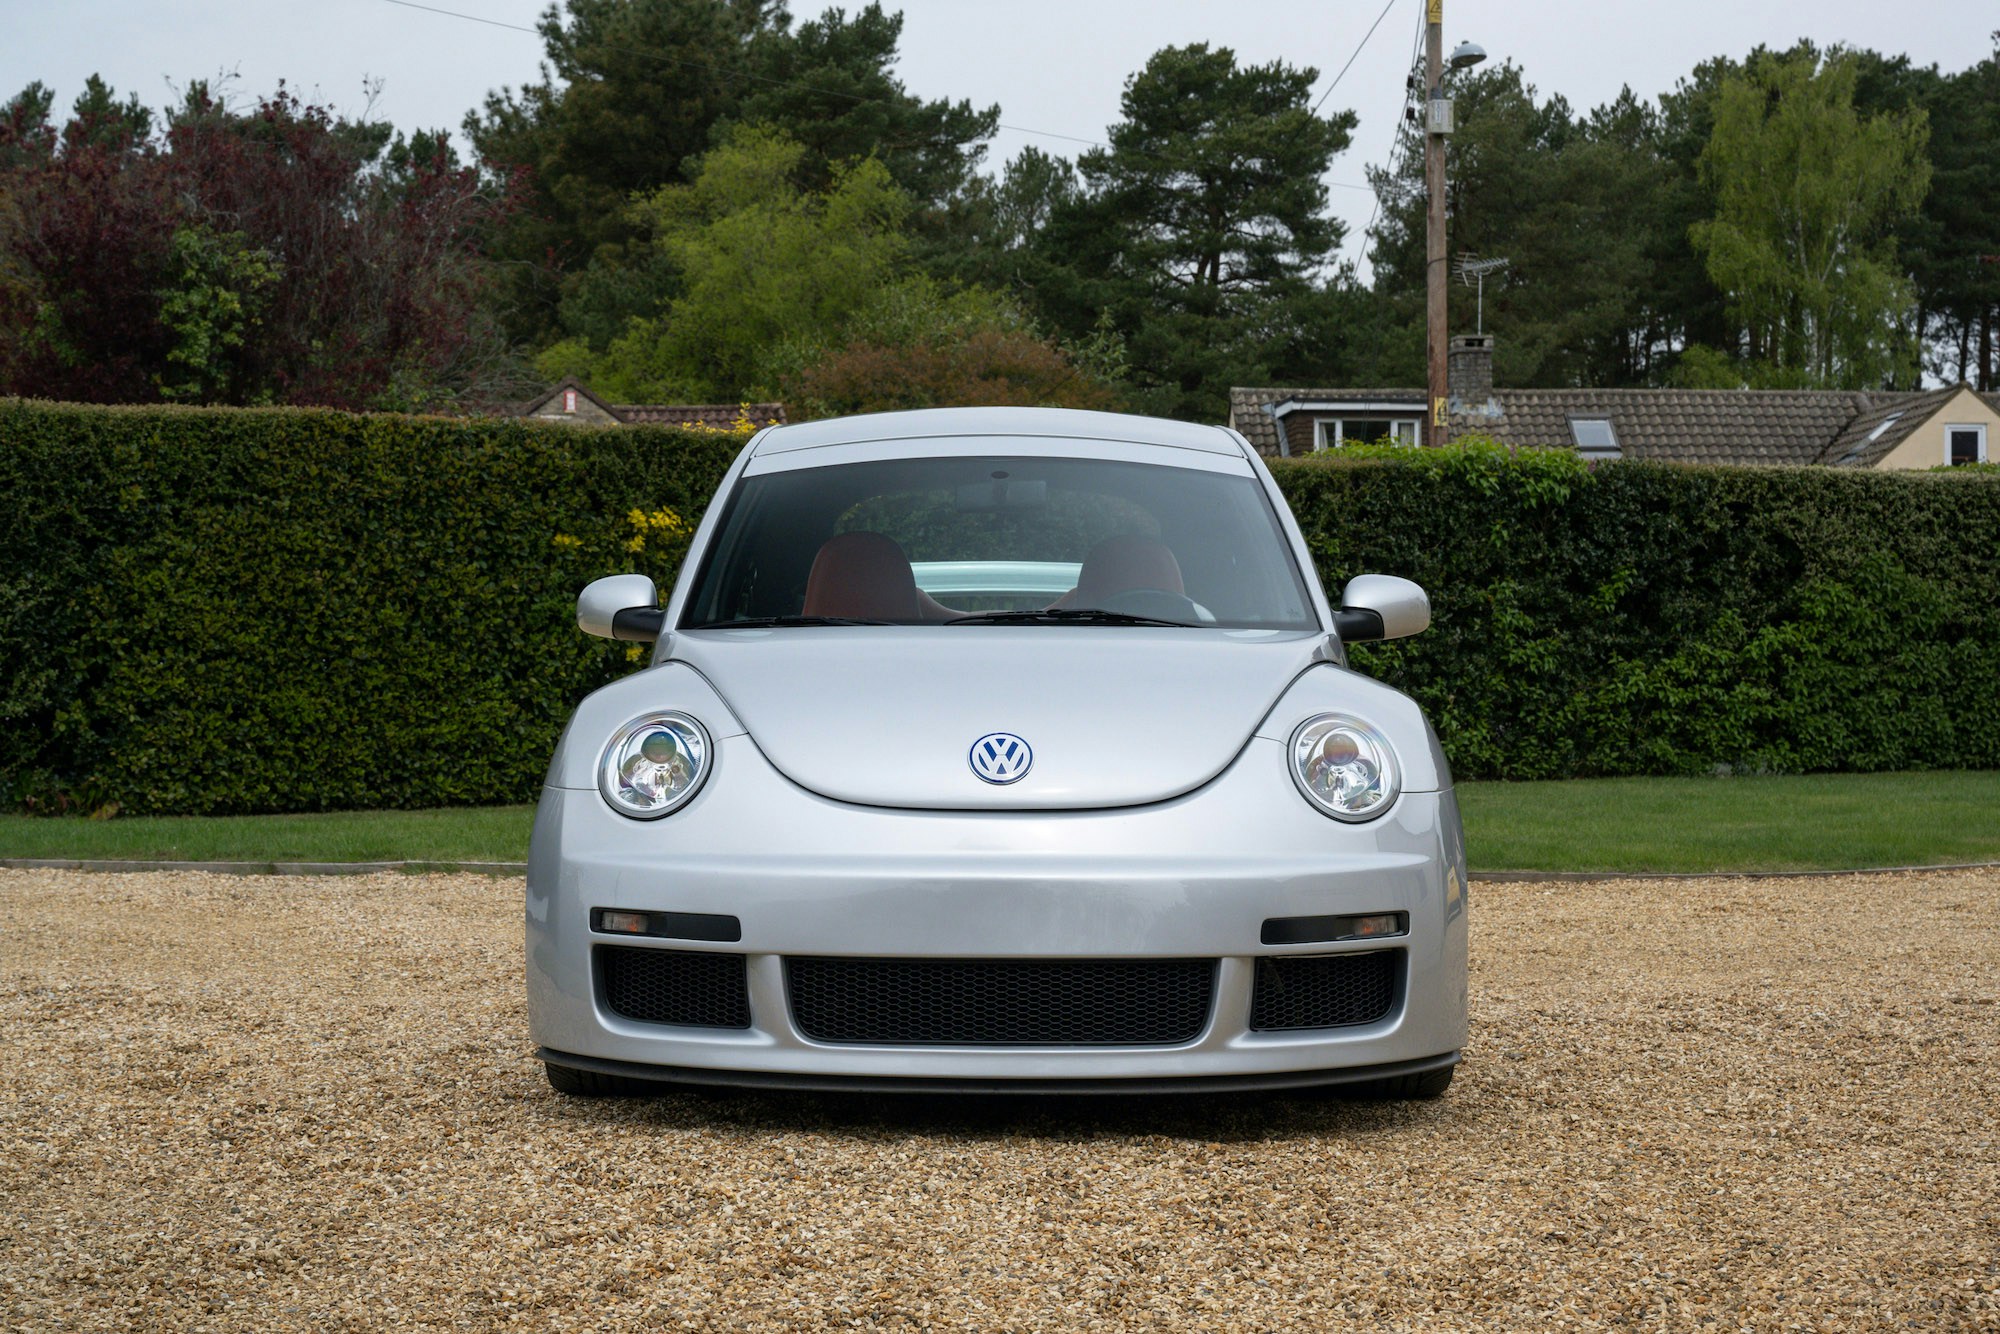 2001 VOLKSWAGEN BEETLE RSI for sale by auction in St Leonards, Hampshire,  United Kingdom